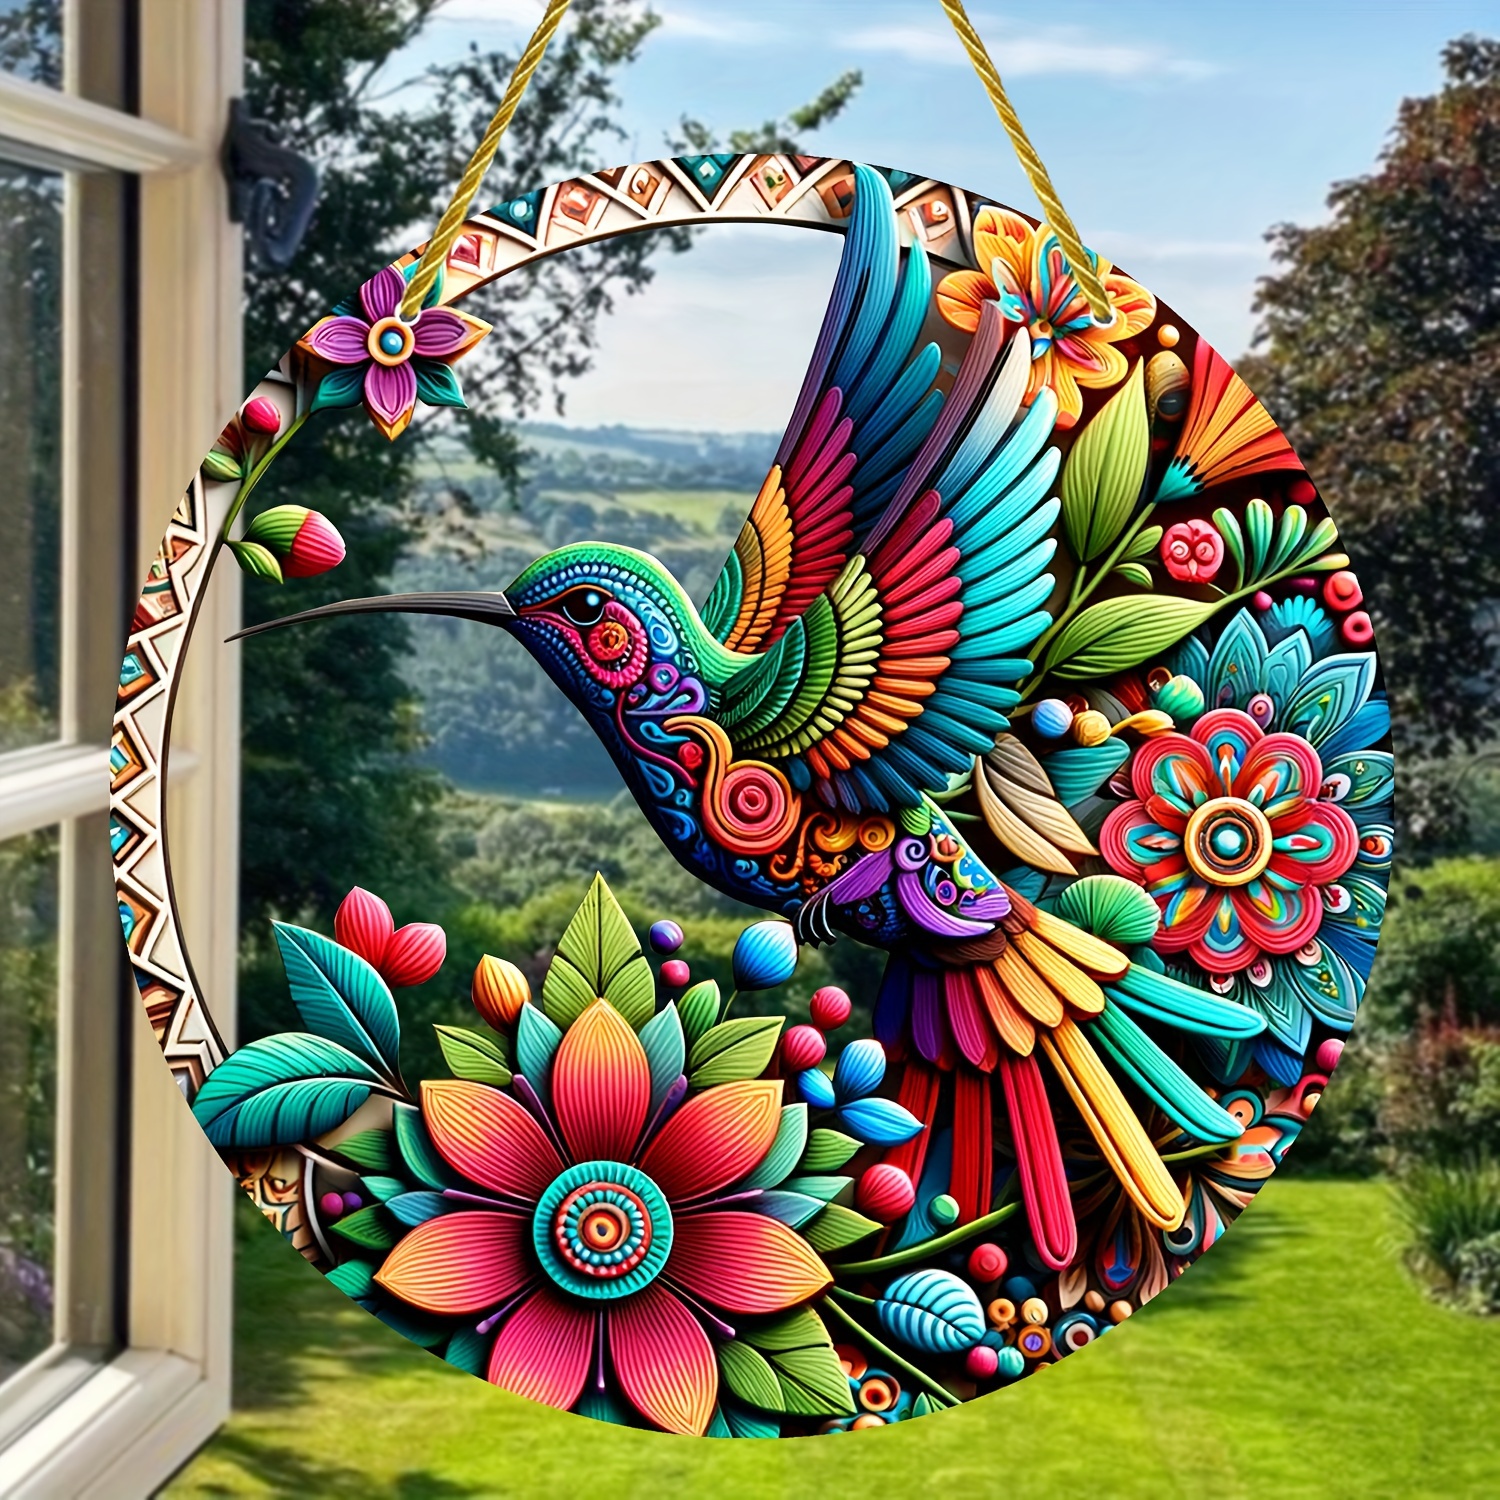 

Bohemian Hummingbird Stained Glass-style Acrylic Window Hanging - 8''x8'' | Colorful Light Catcher & Sunshade | Perfect For Home, Garden, Patio Decor | Unique Gift Idea